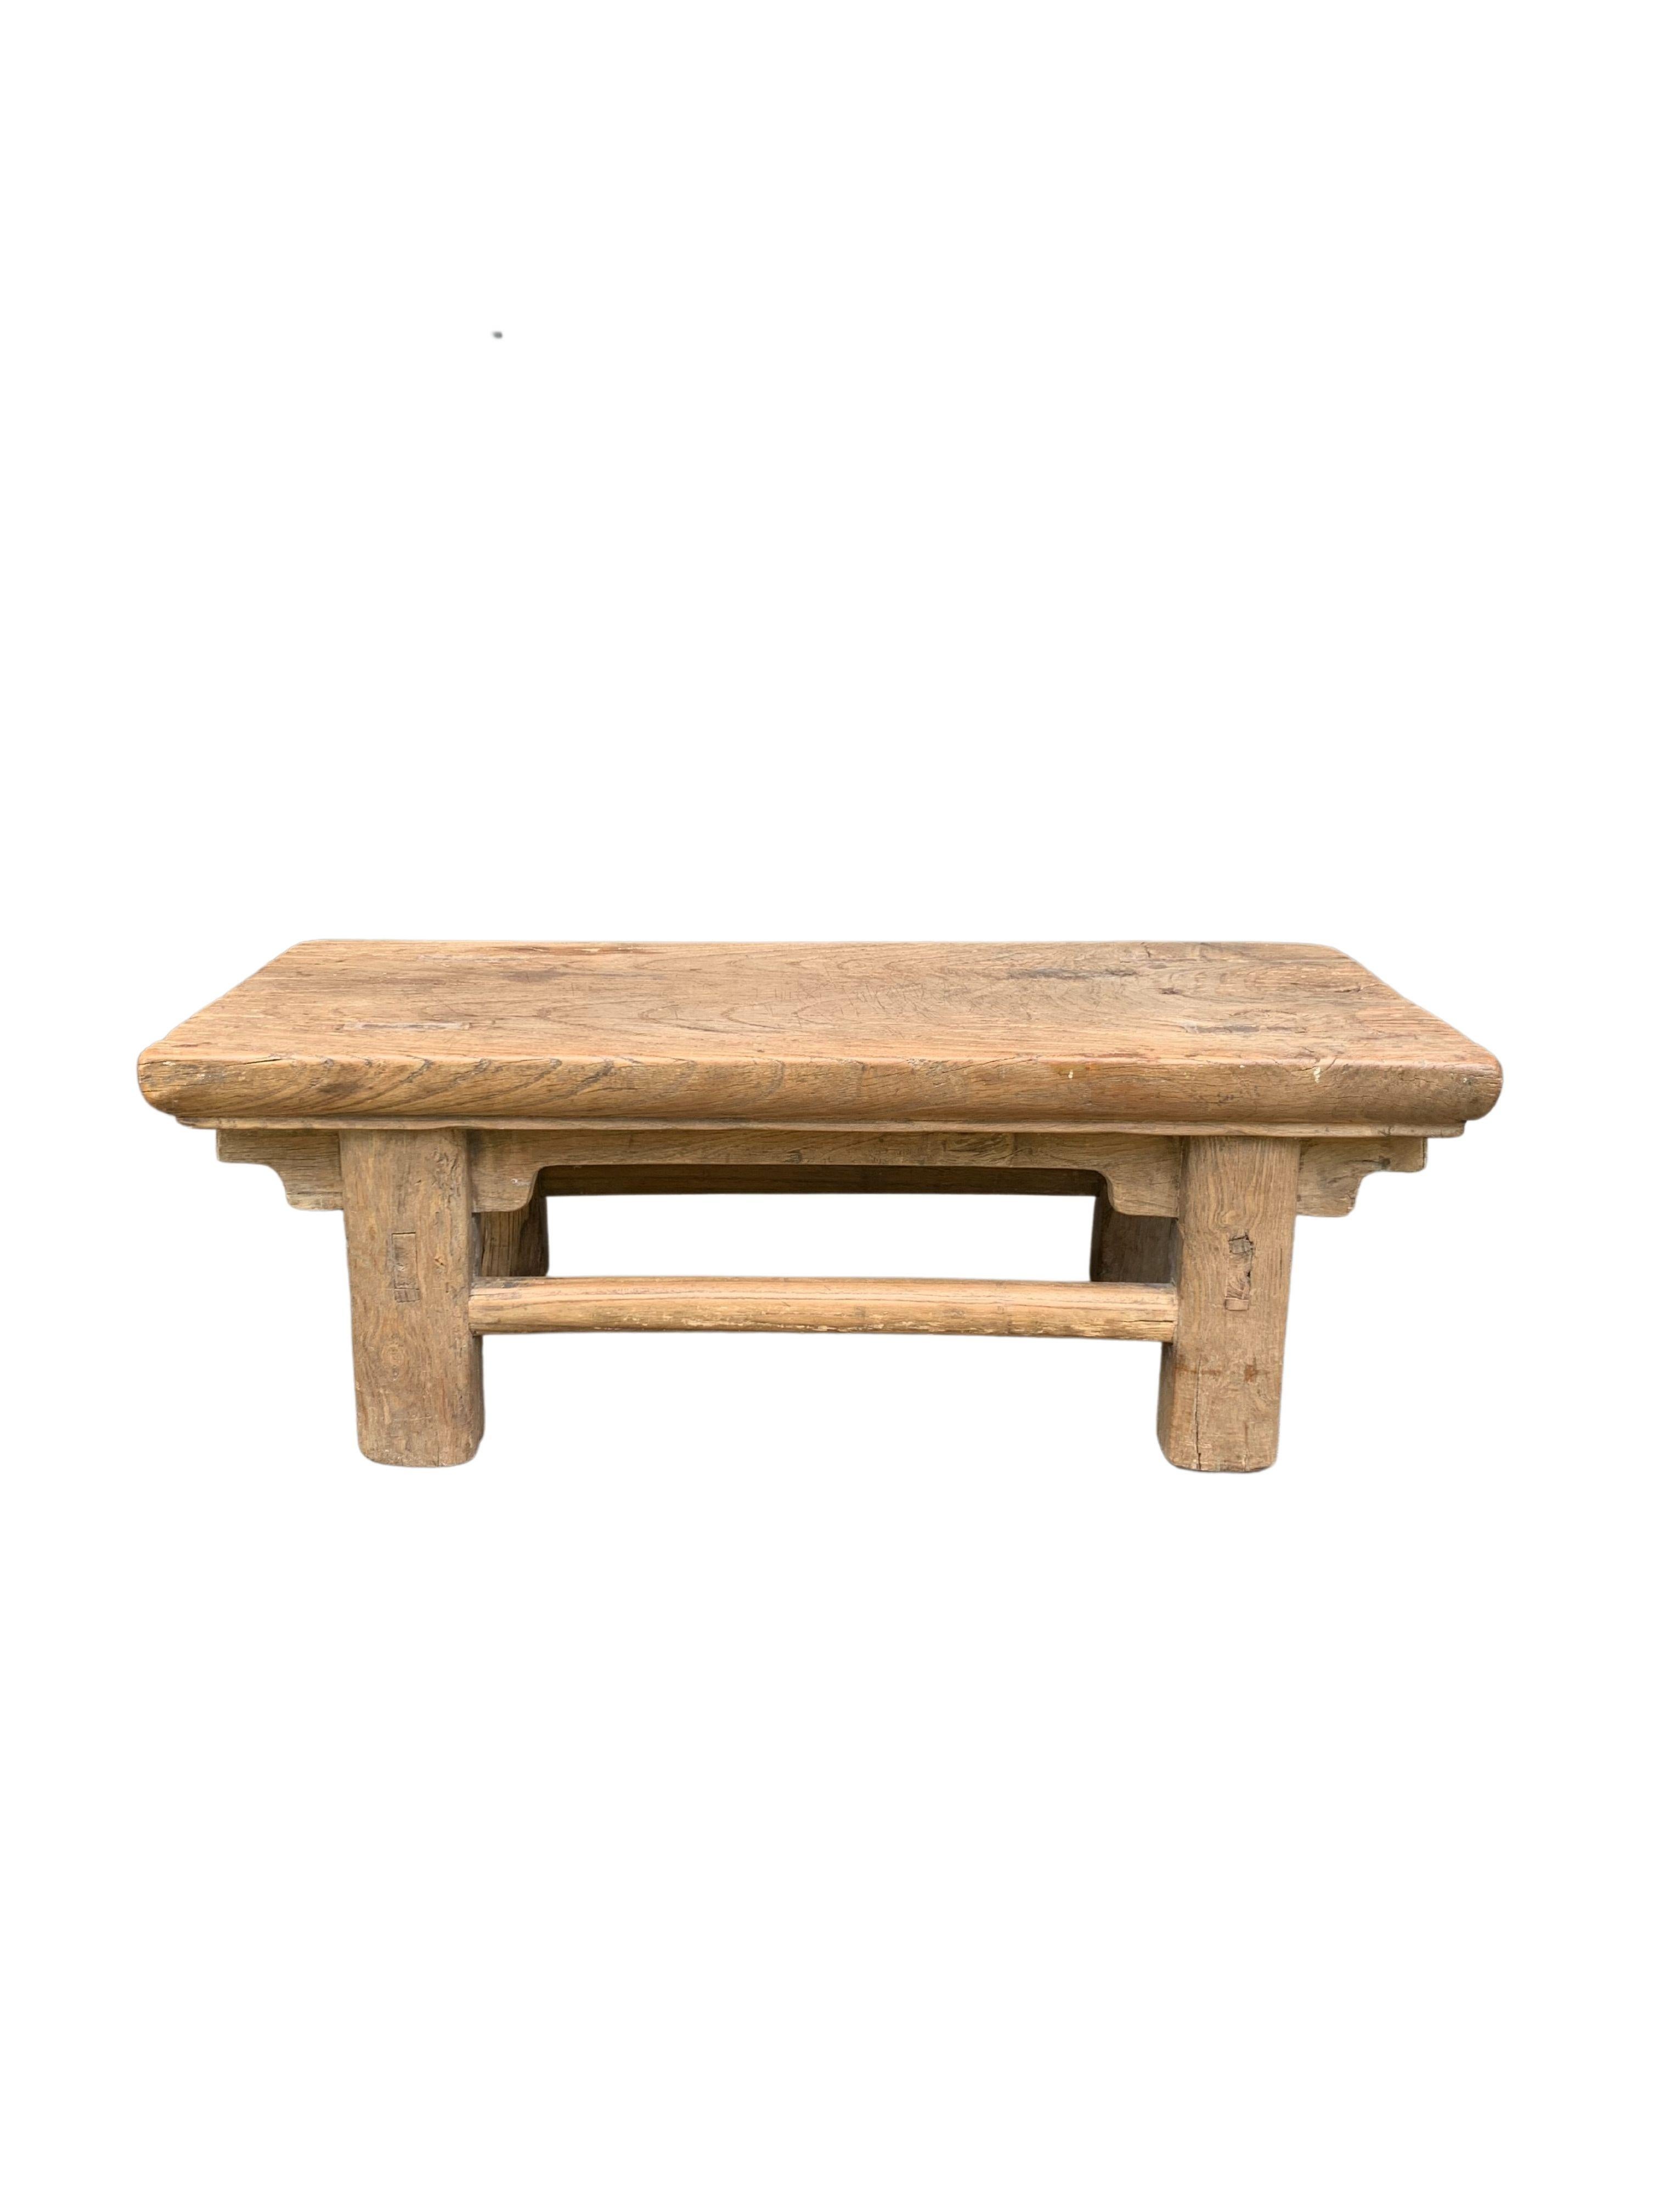 Hand-Carved Antique Chinese Elm Wood Low Stool, Early 20th Century